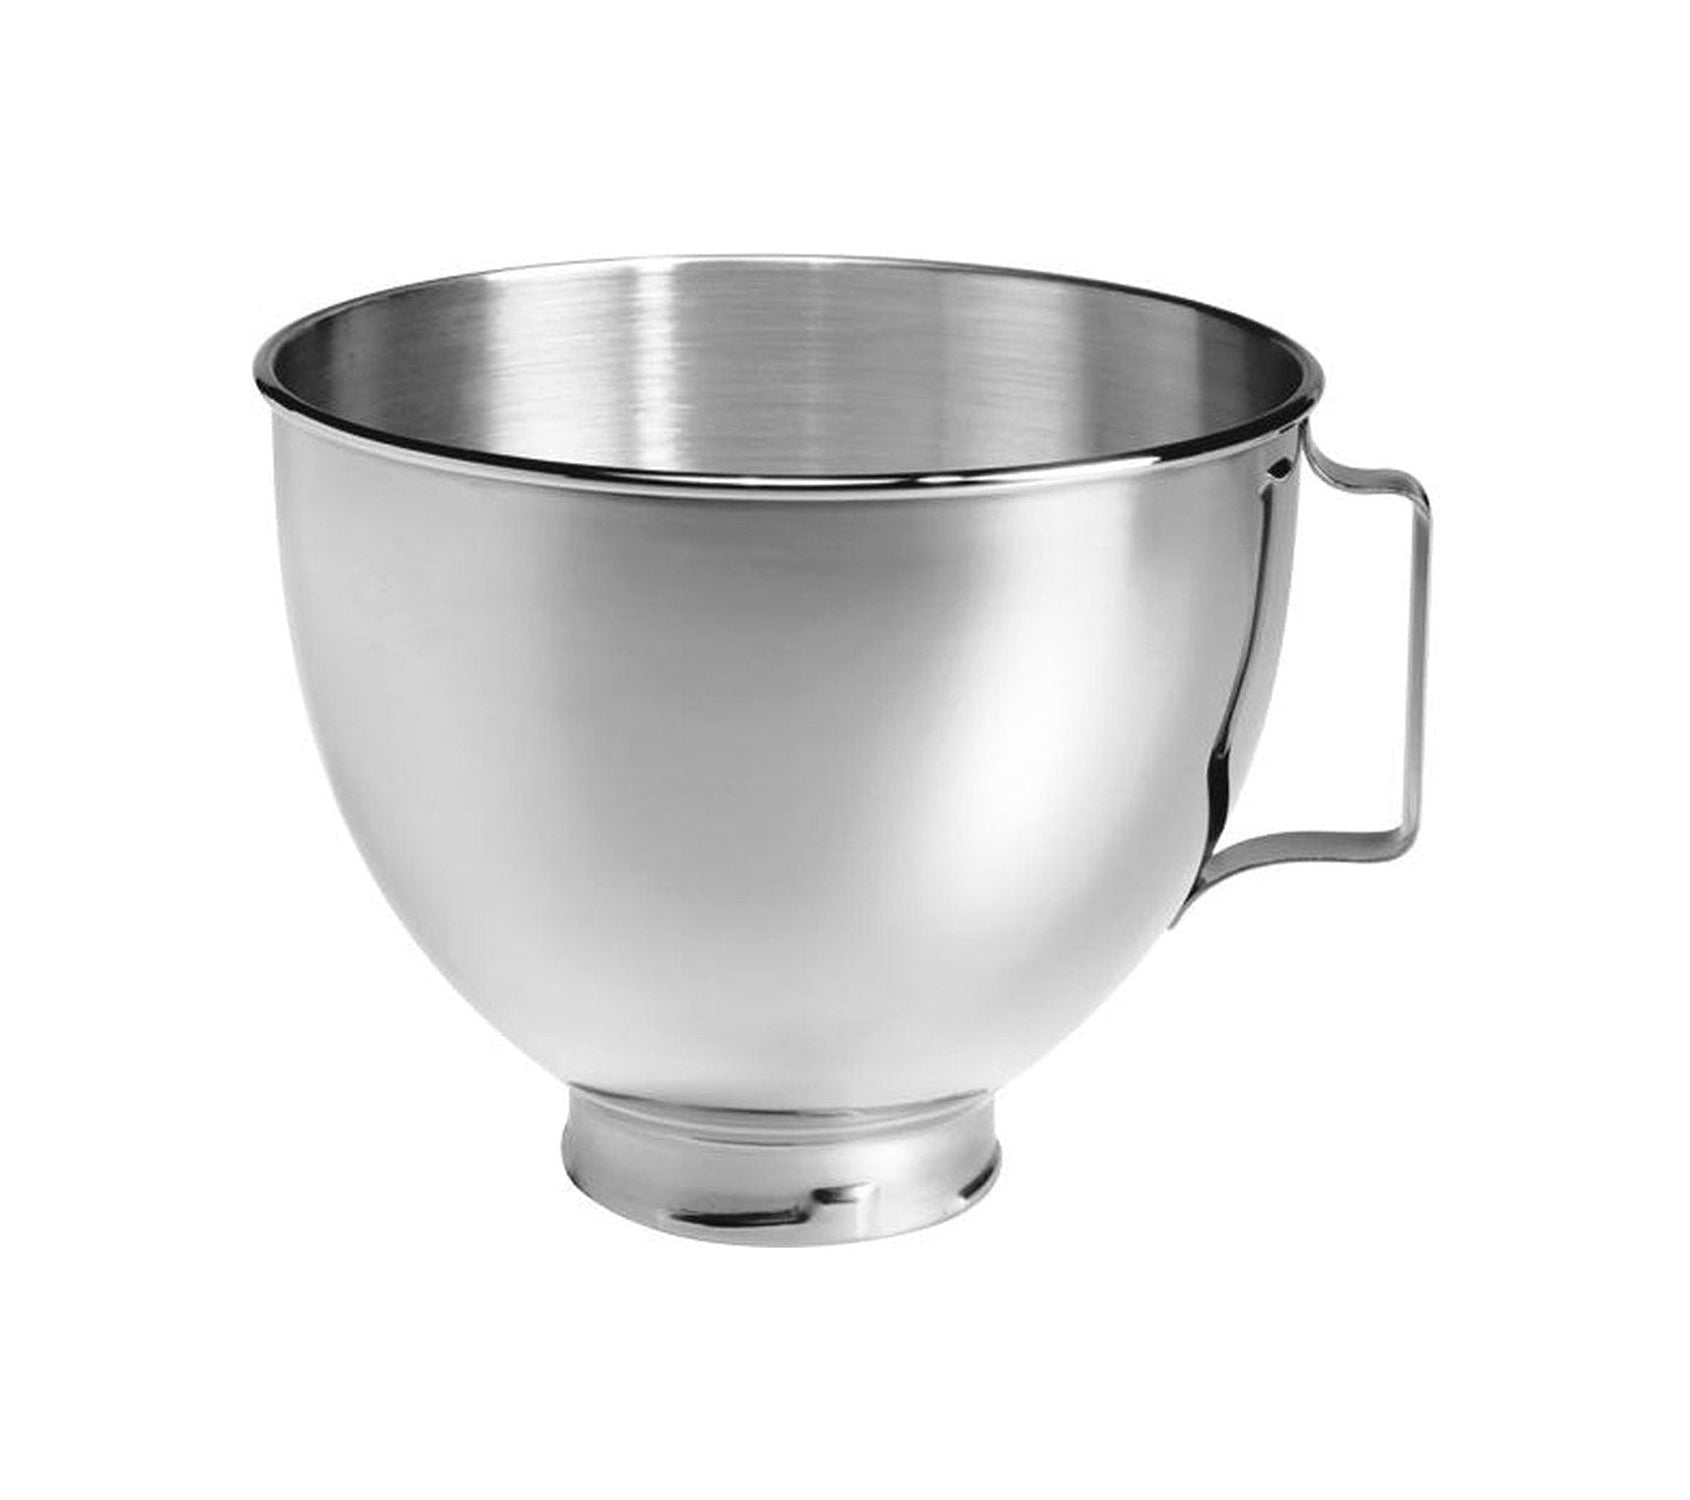 Kitchen Aid 5 K45 Sbwh Mixing Bowl, Stainless Steel